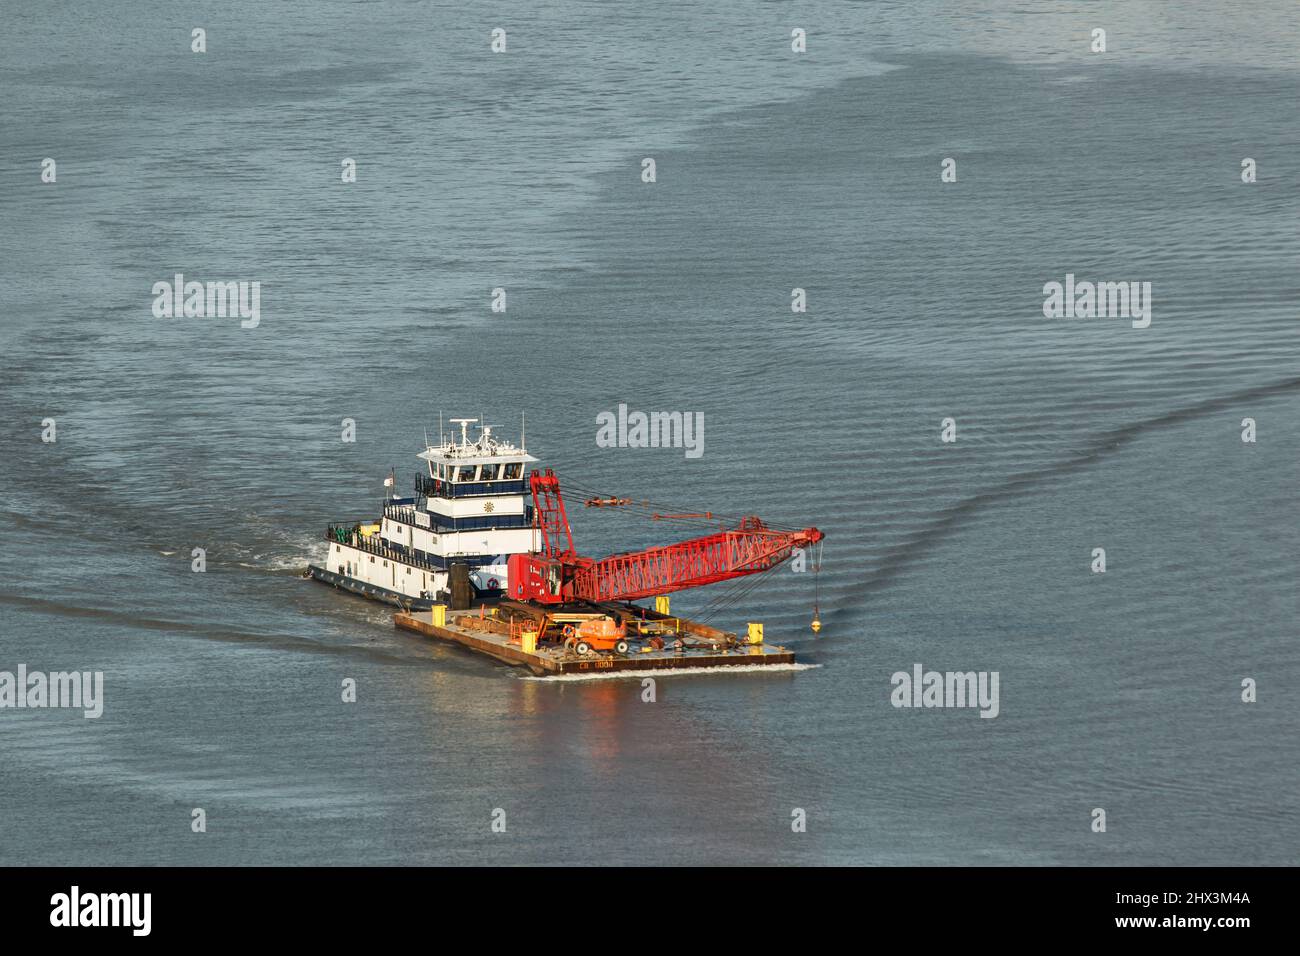 Tug Boat on the Ohio River. The barge is carrying a crane and other equipment. As viewed from Mount Echo Park. Cincinnati, Ohio, USA. Stock Photo